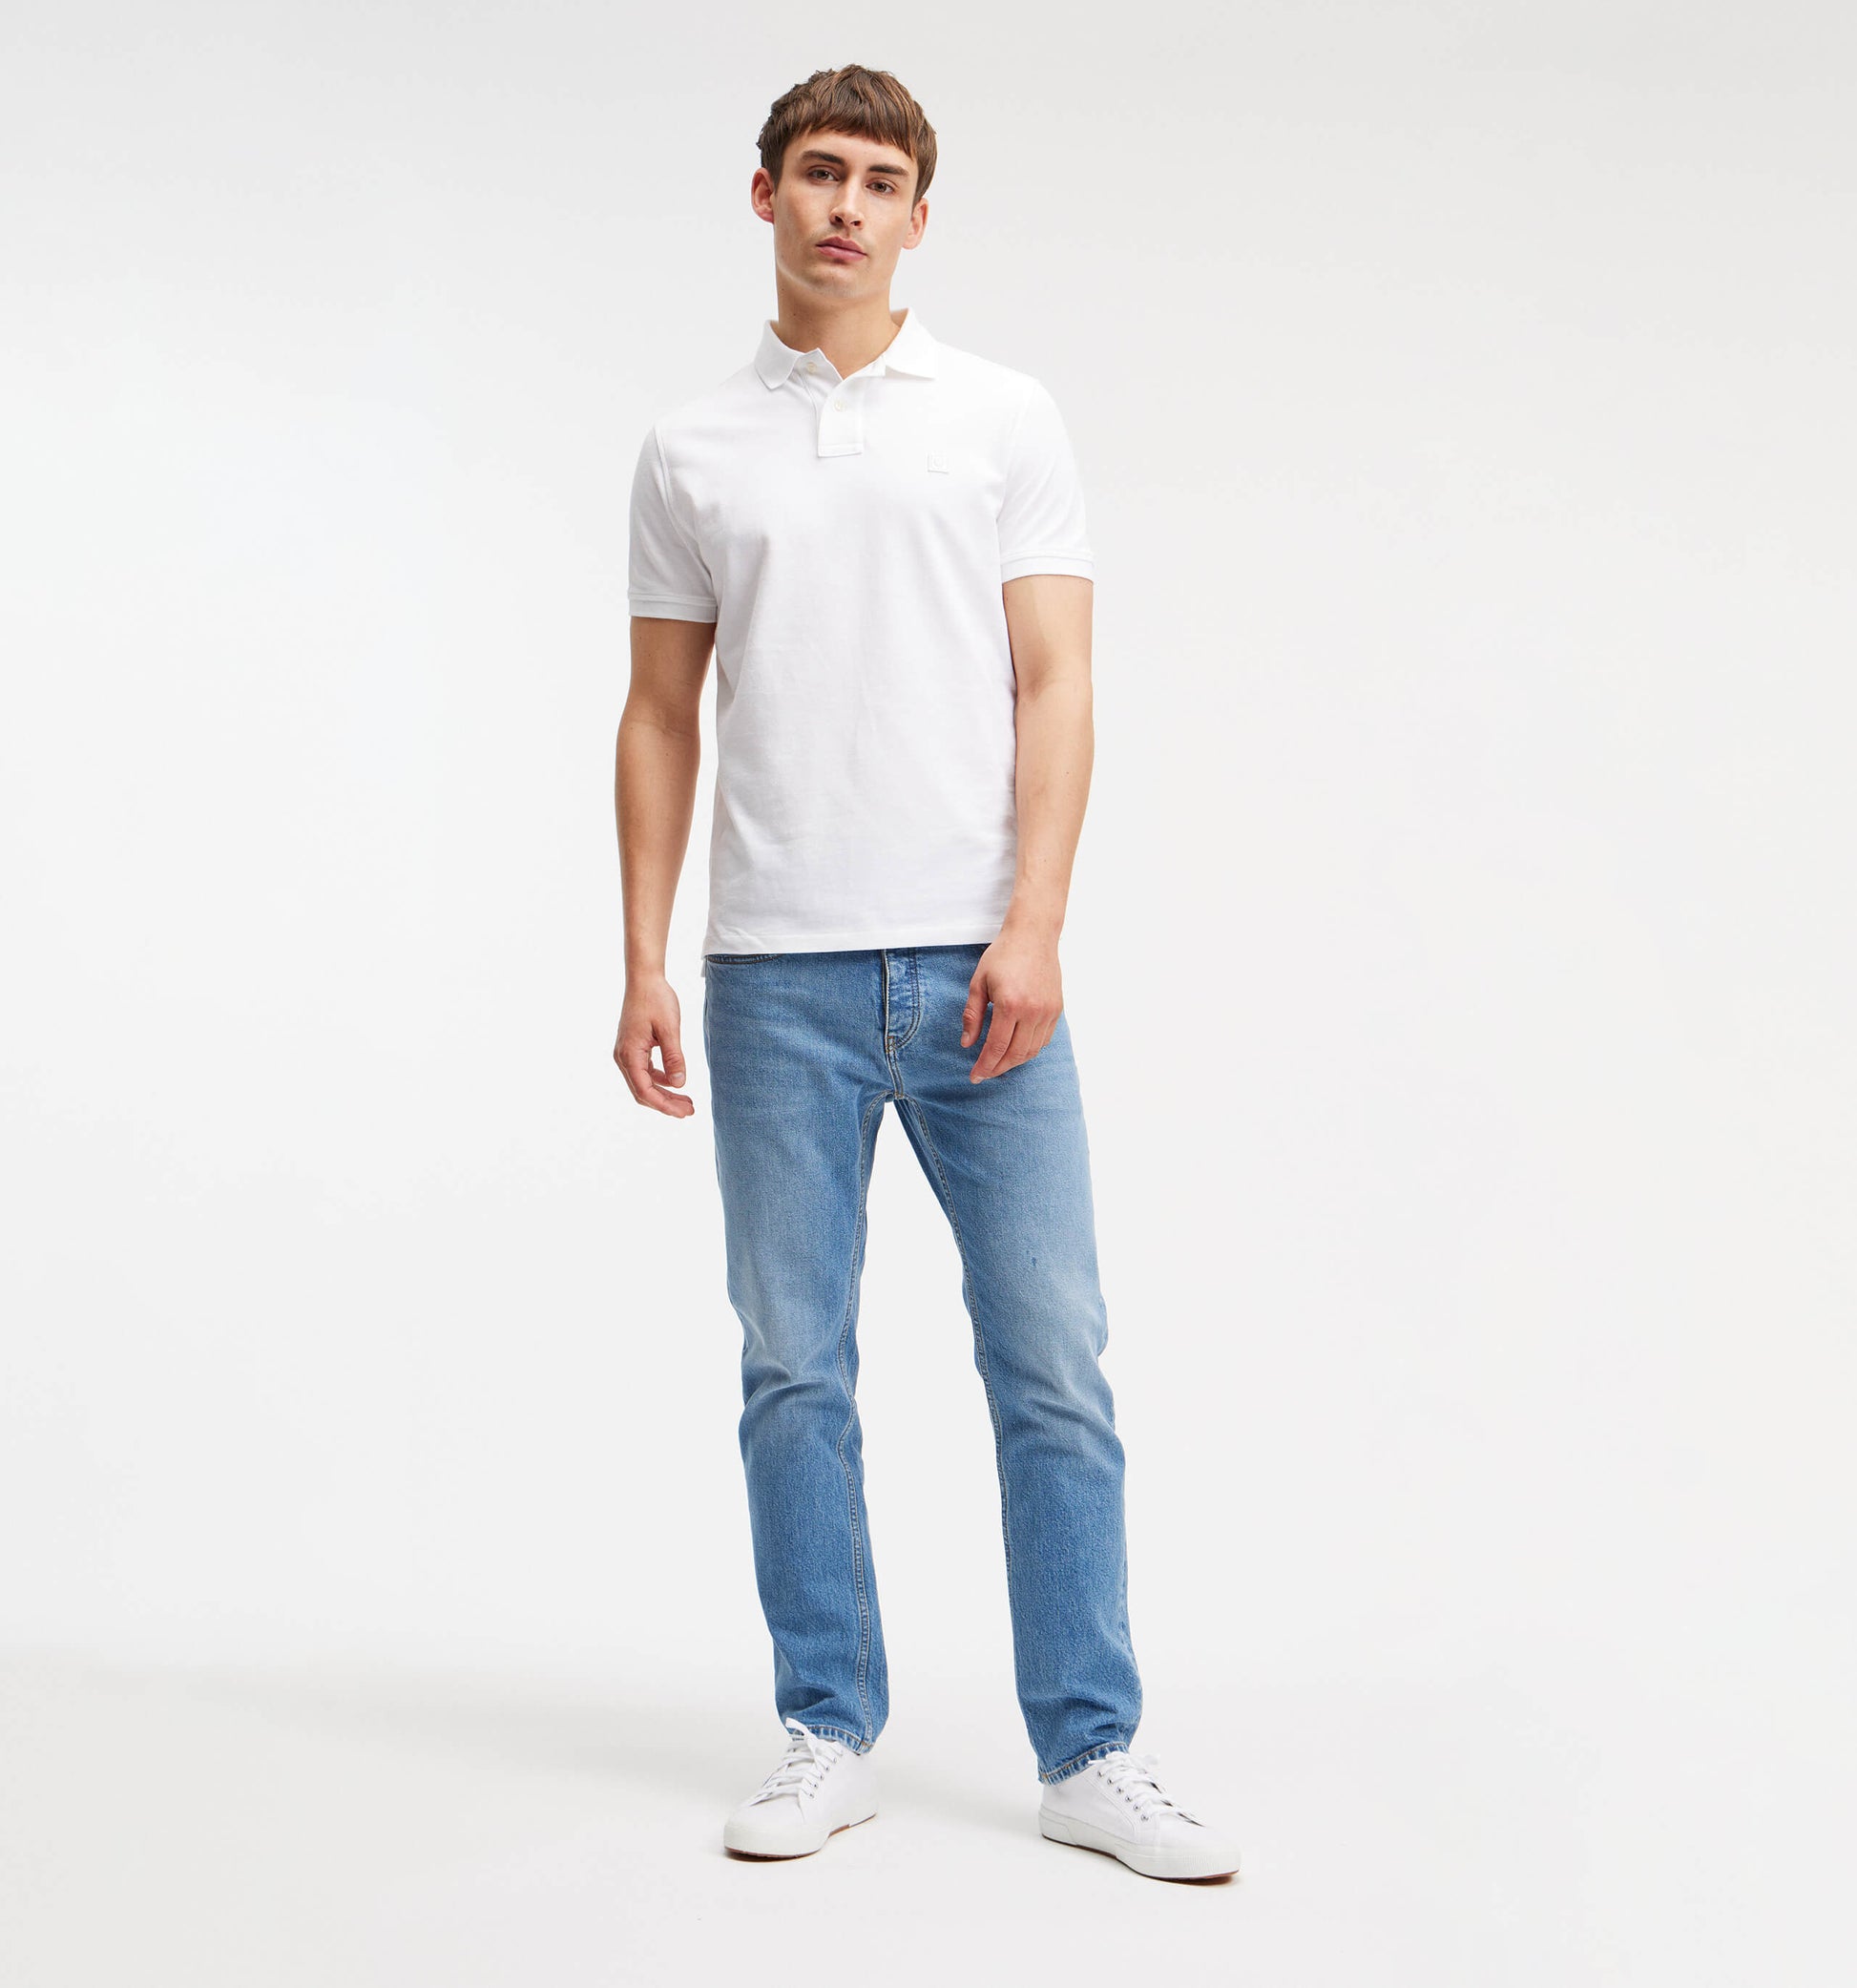 The Rene - Pique Polo In White From King Essentials